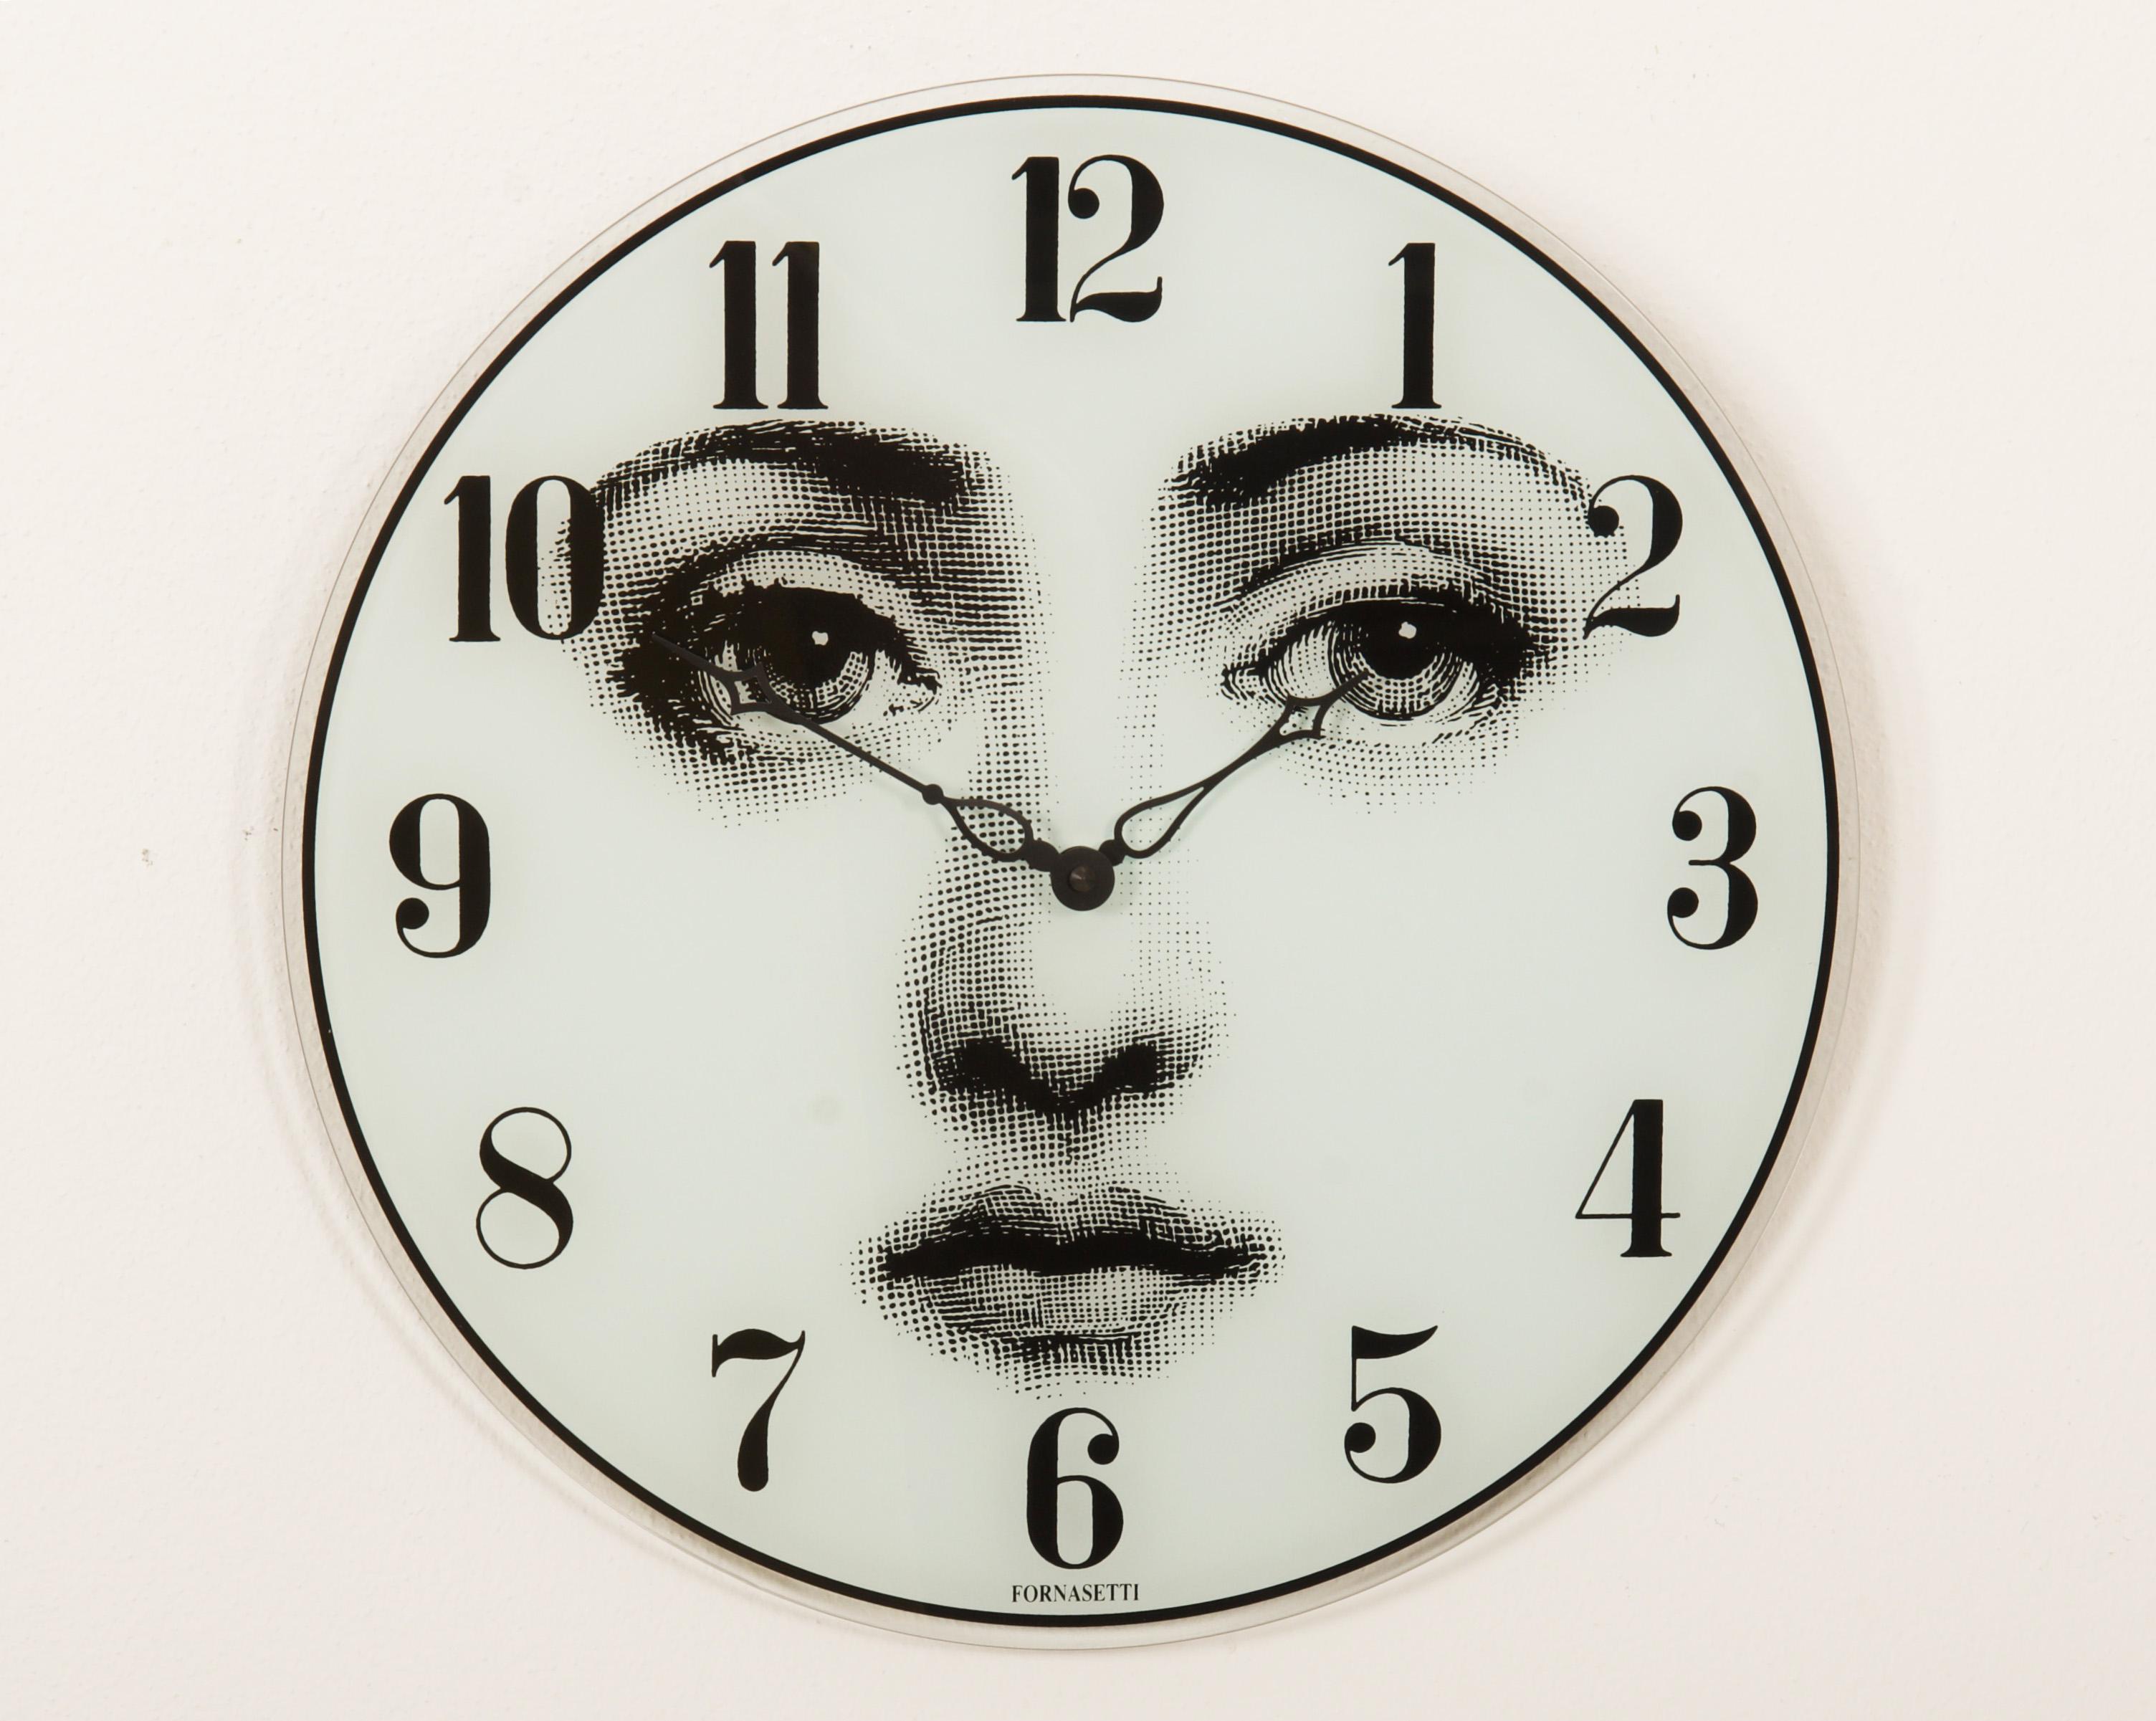 Piero Fornasetti wall clock created in 1990s. Glass clock face with printed woman face and digits with quartz clockwork. Measures: Ø 37 cm.